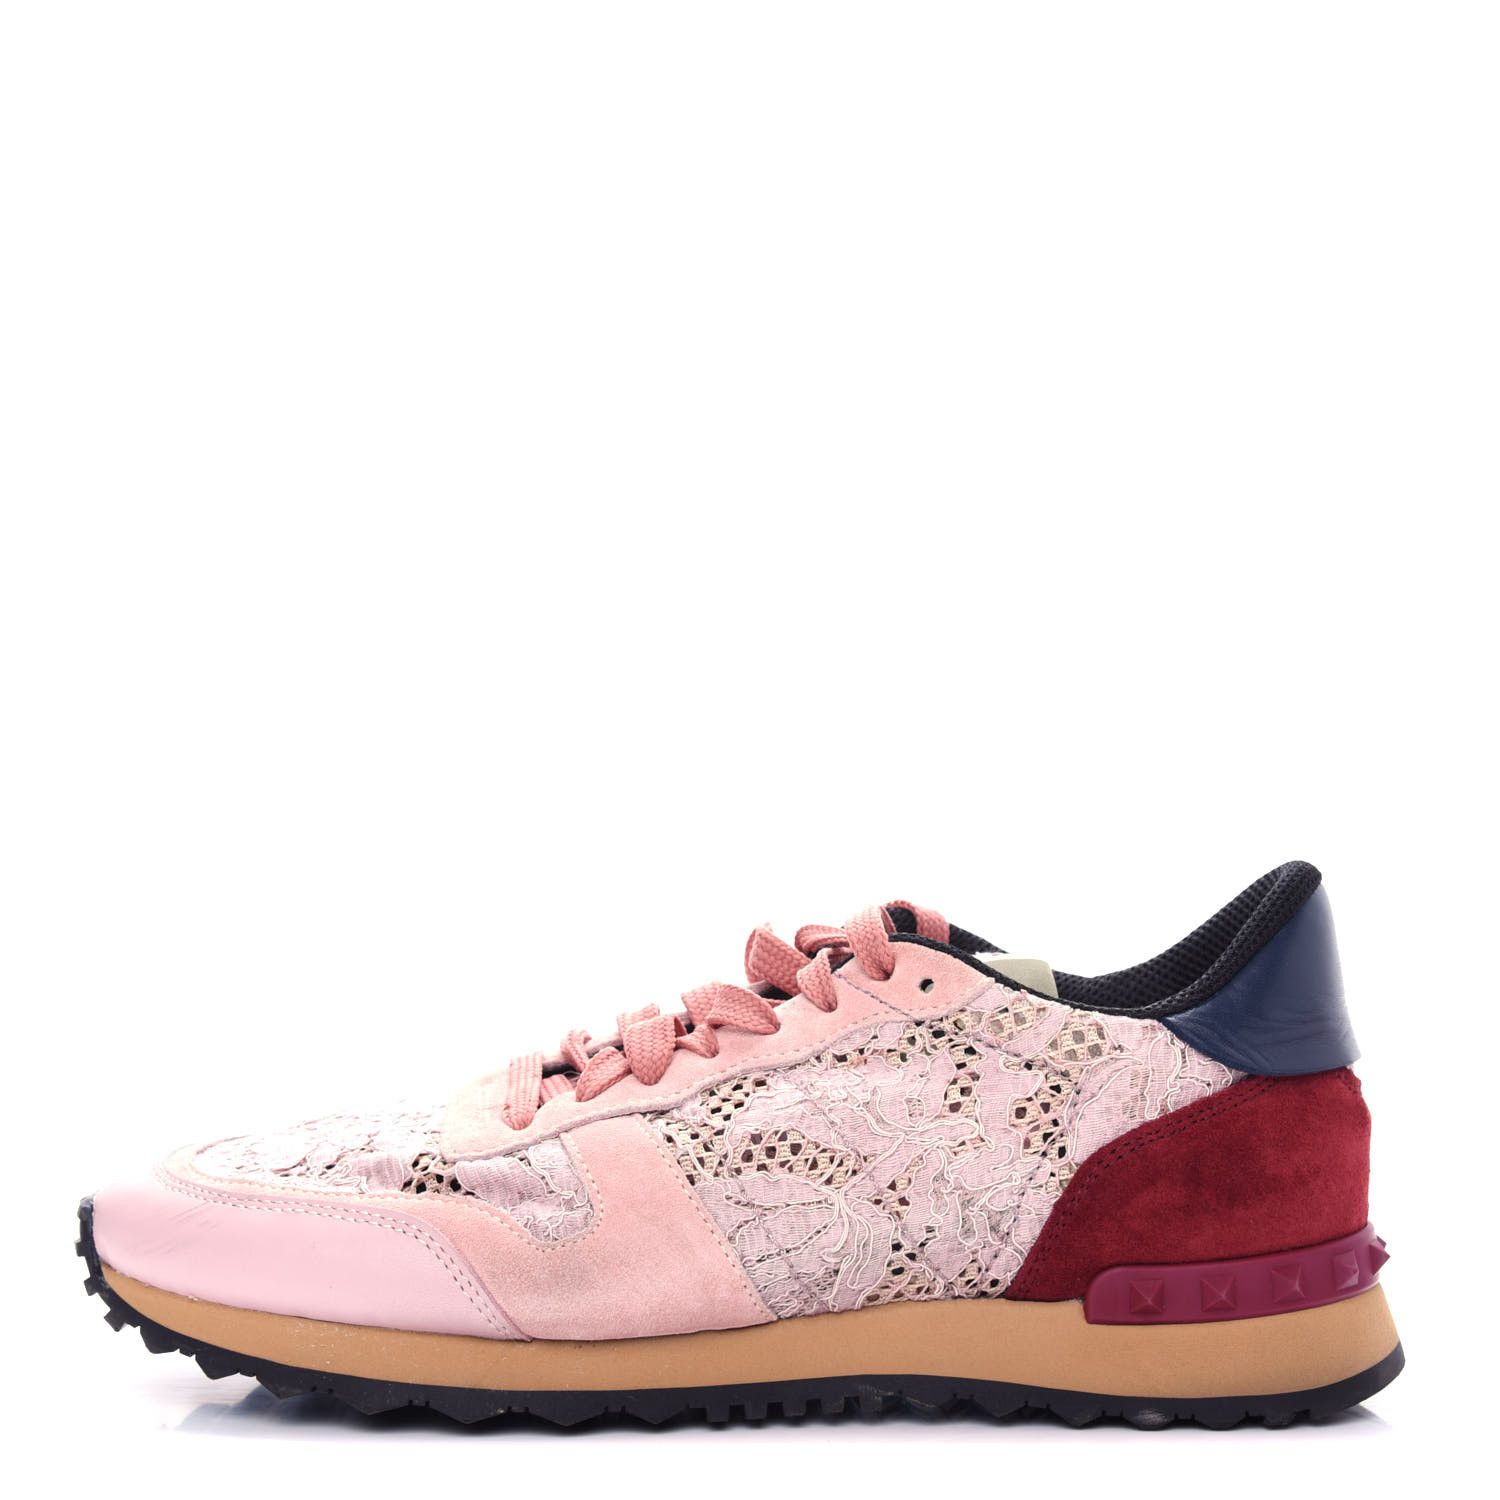 VALENTINO

Calfskin Suede Macrame Lace Rockstud Sneakers 41 Water Rose | Fashionphile